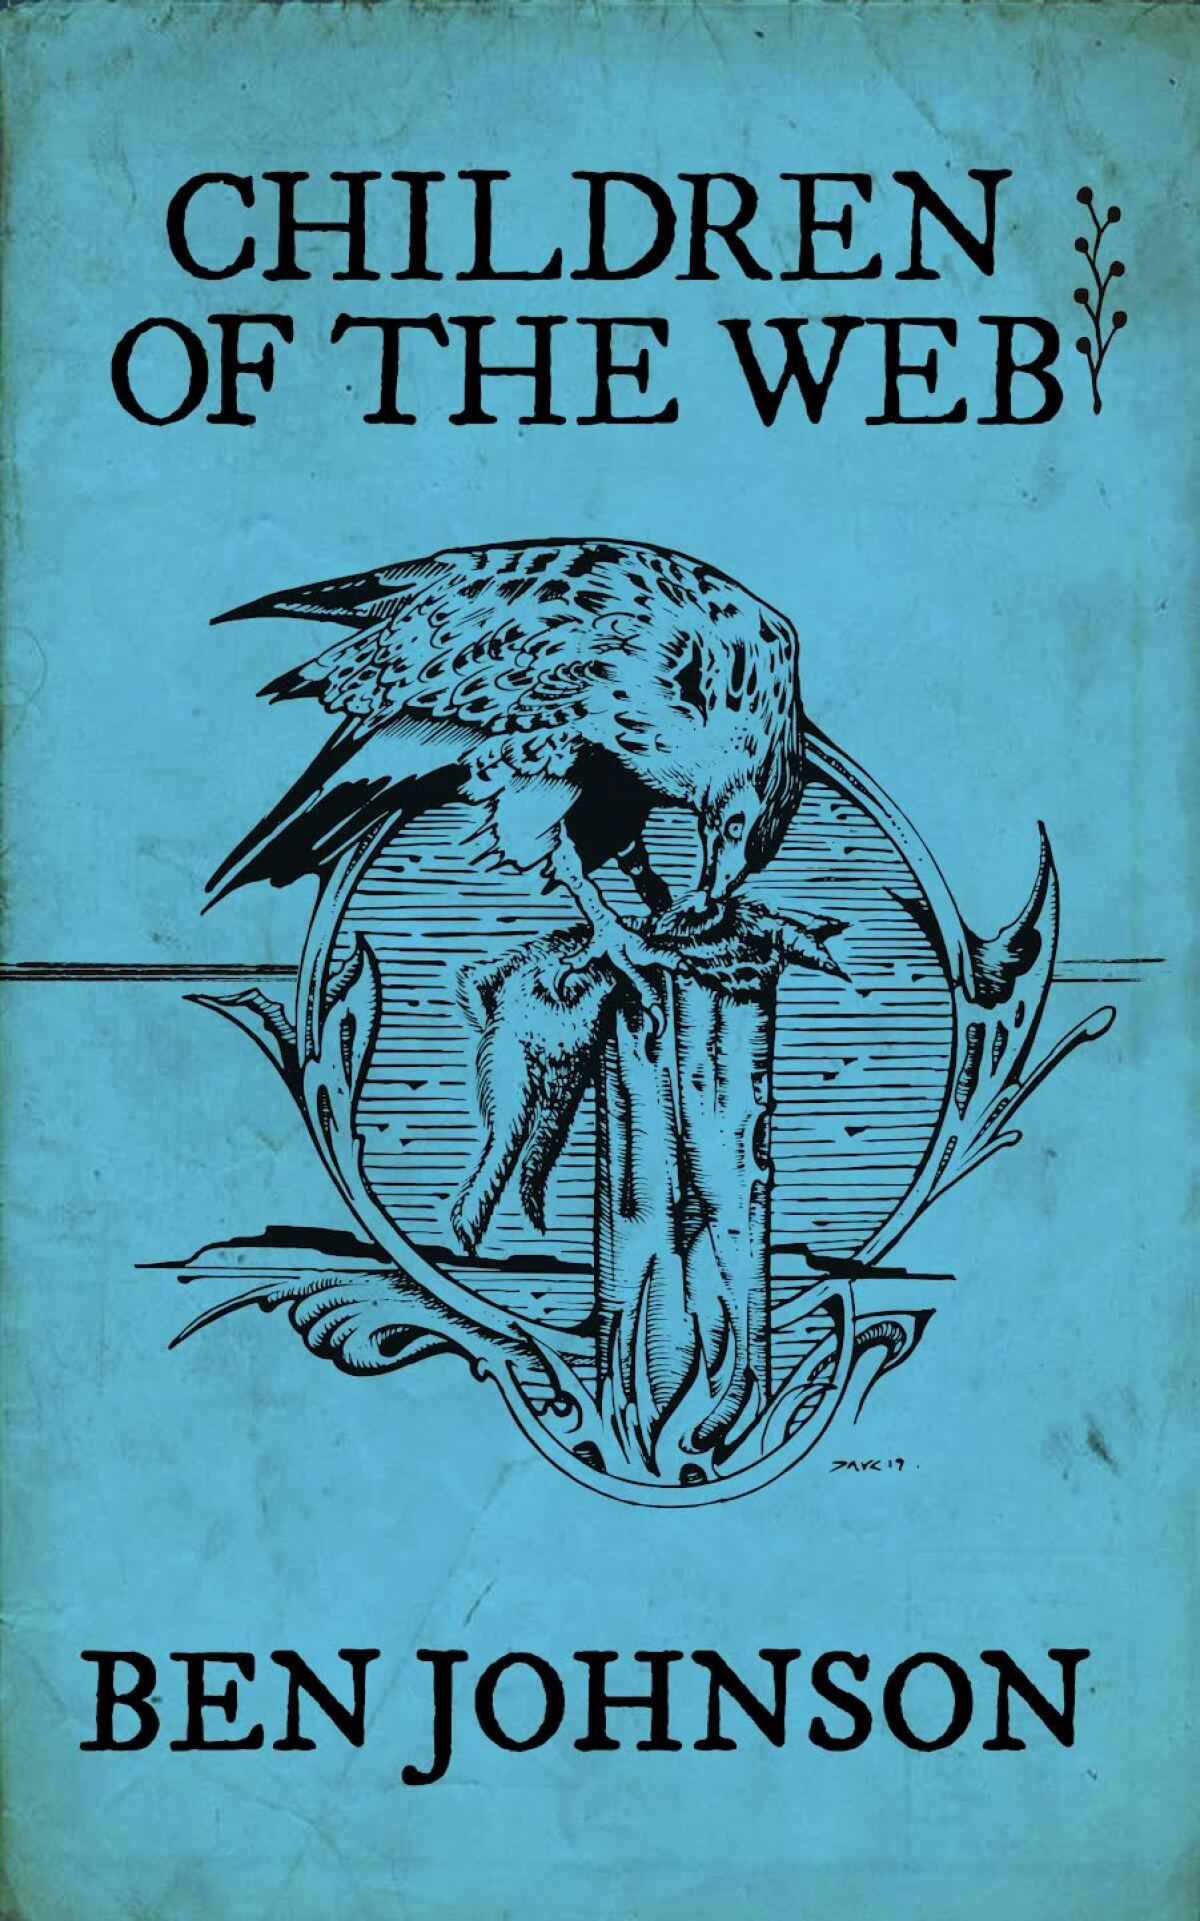 The cover of "Children of the Web" by Ben Johnson